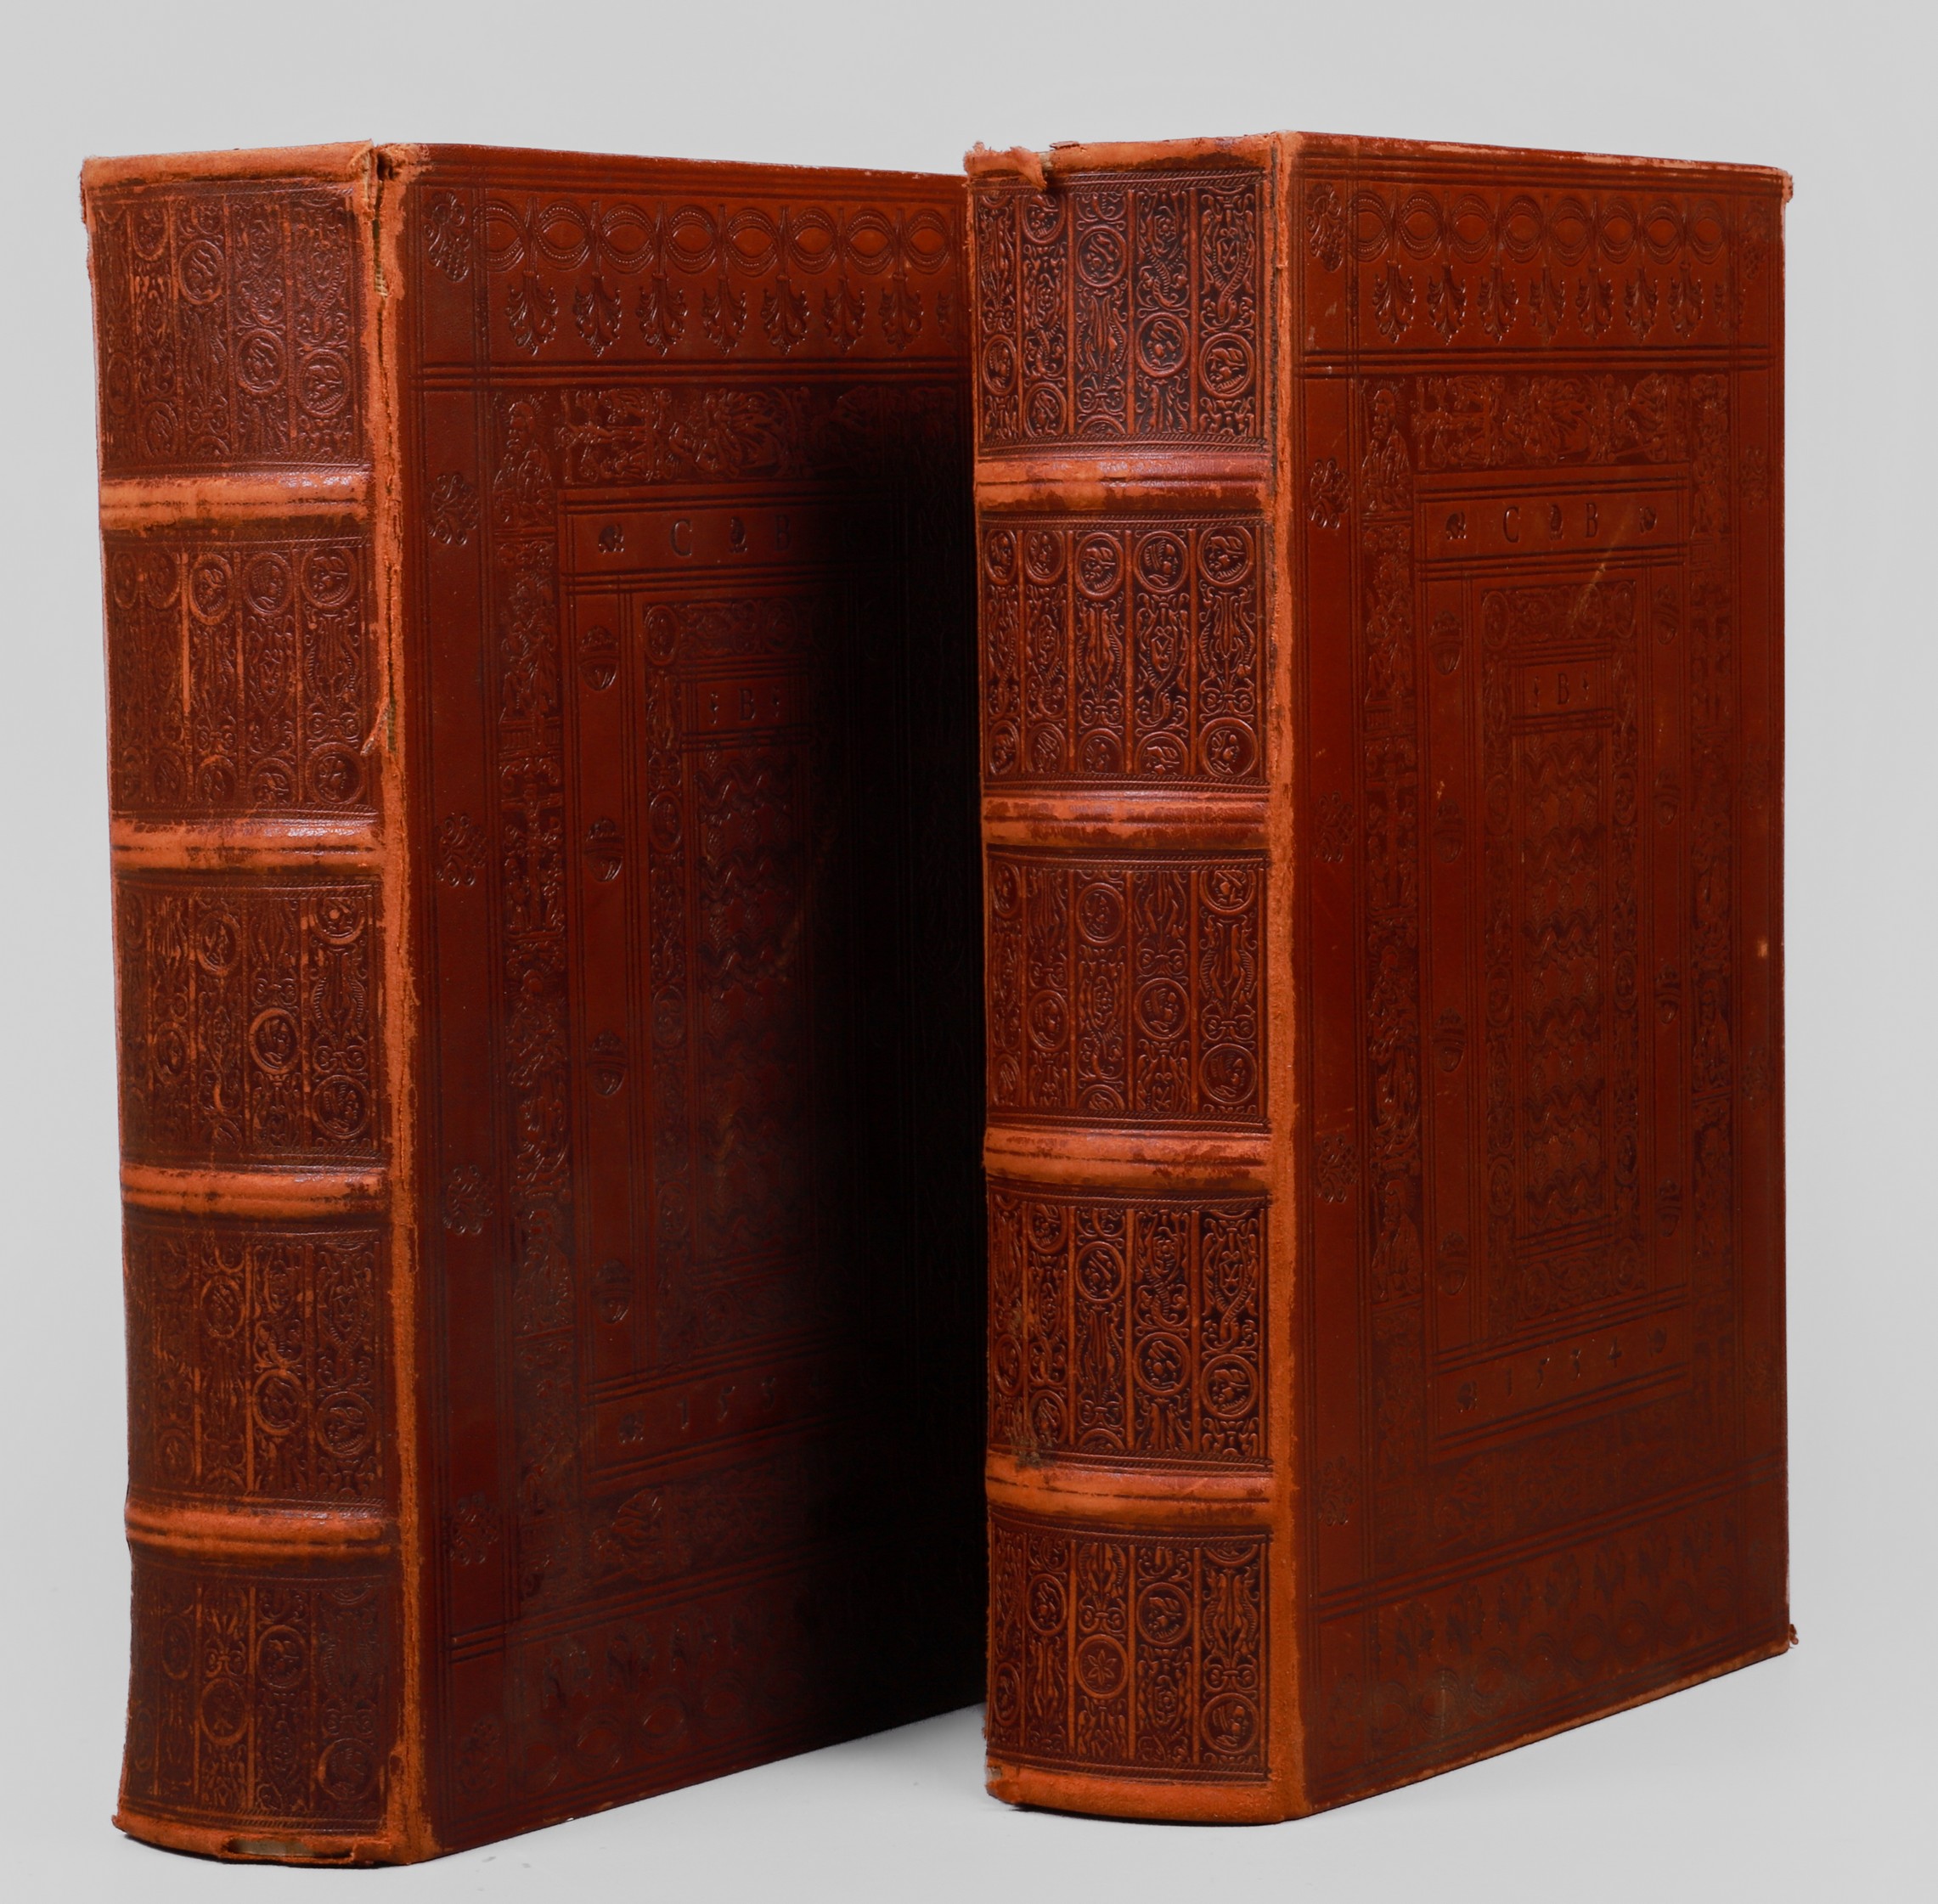 A two volume reproduction of 1534 3b65c2